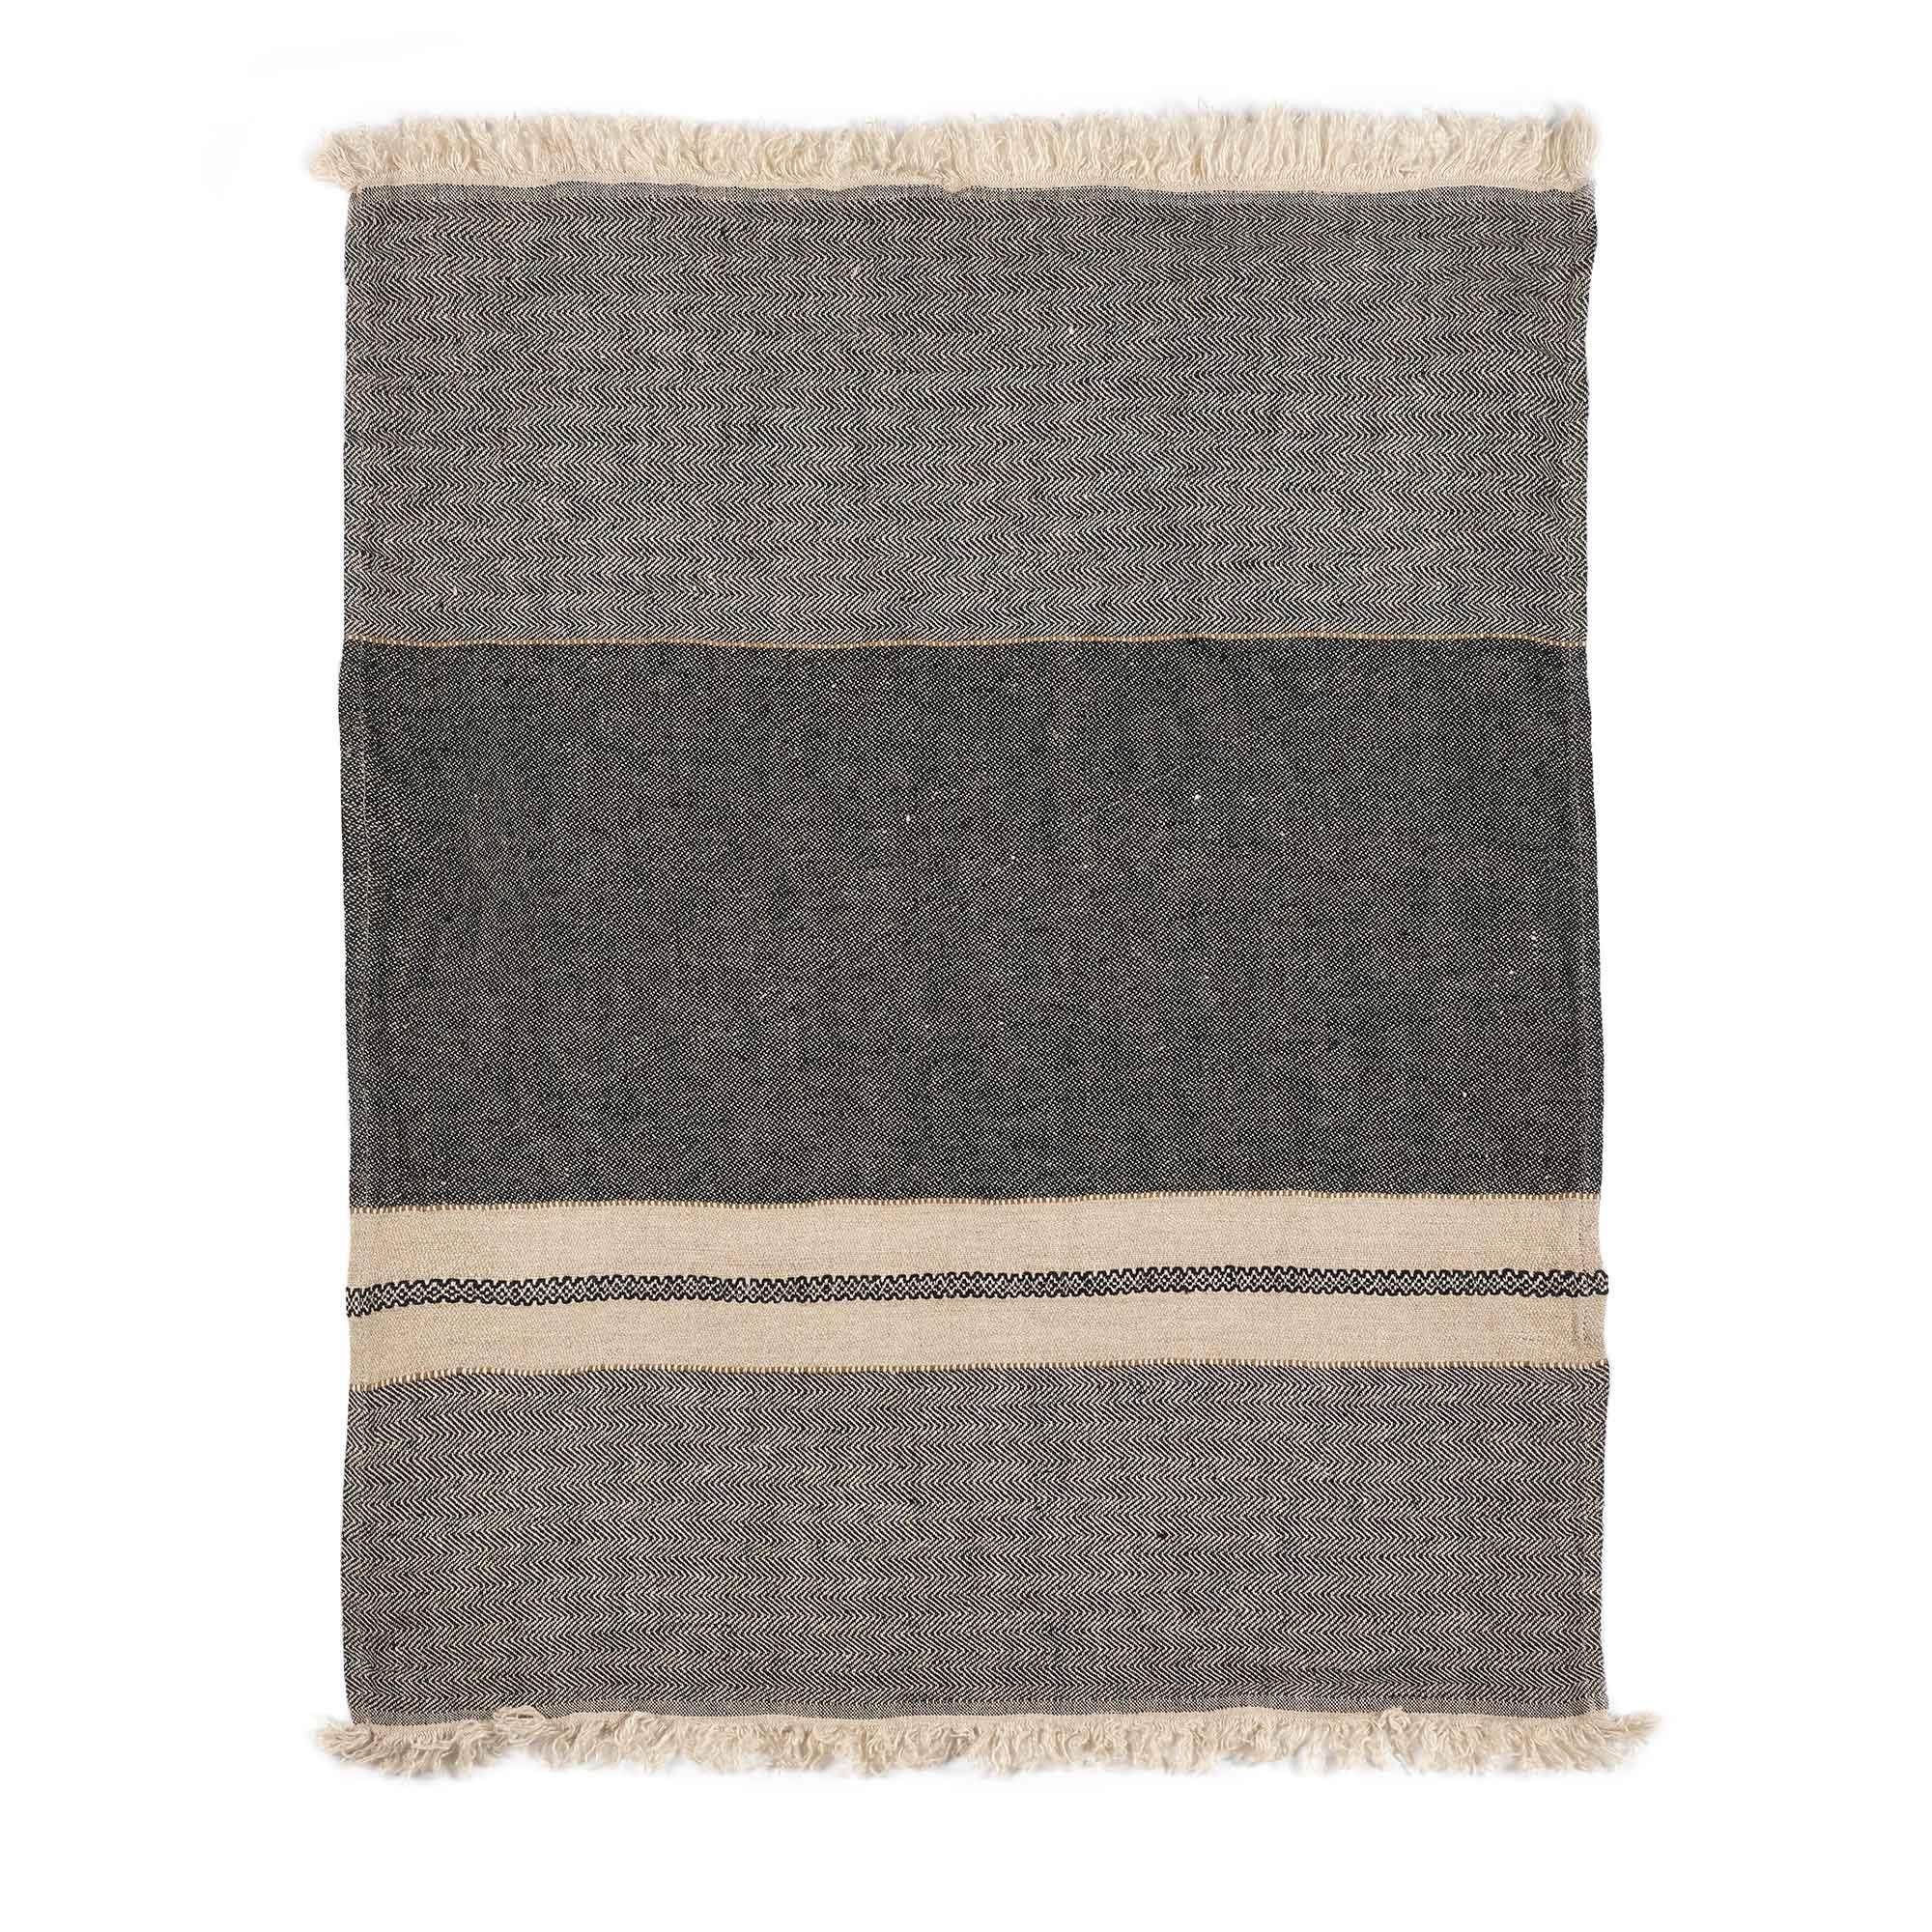 Belgian linen fouta throw blanket flat lay product shot in color Tack Stripe by Libeco for South Hous.